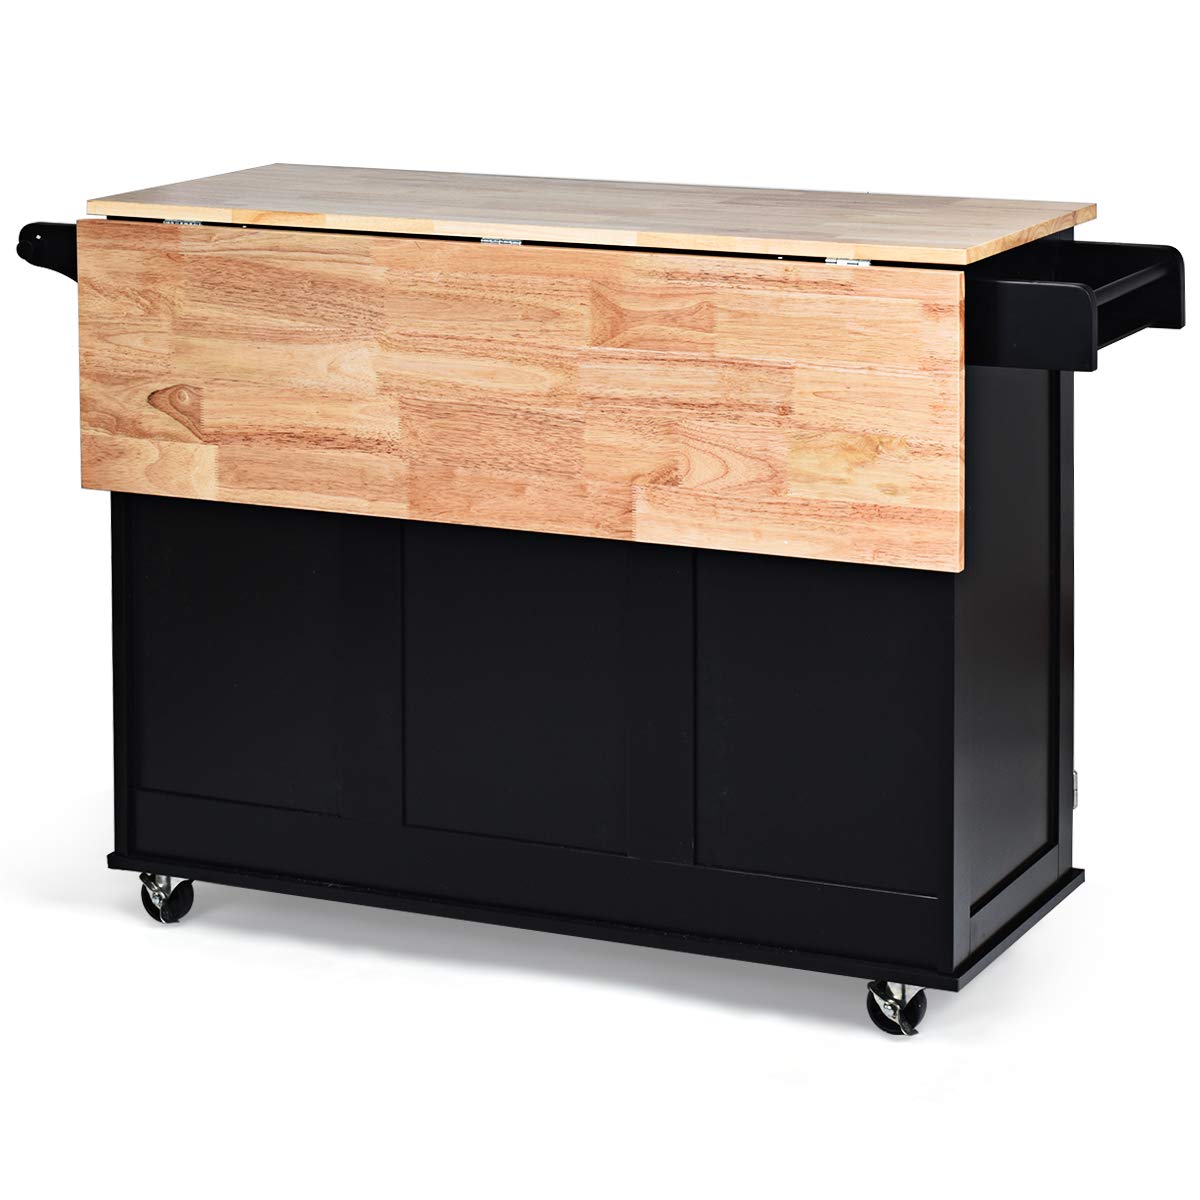 Giantex Kitchen Island Cart with Drop-Leaf Tabletop